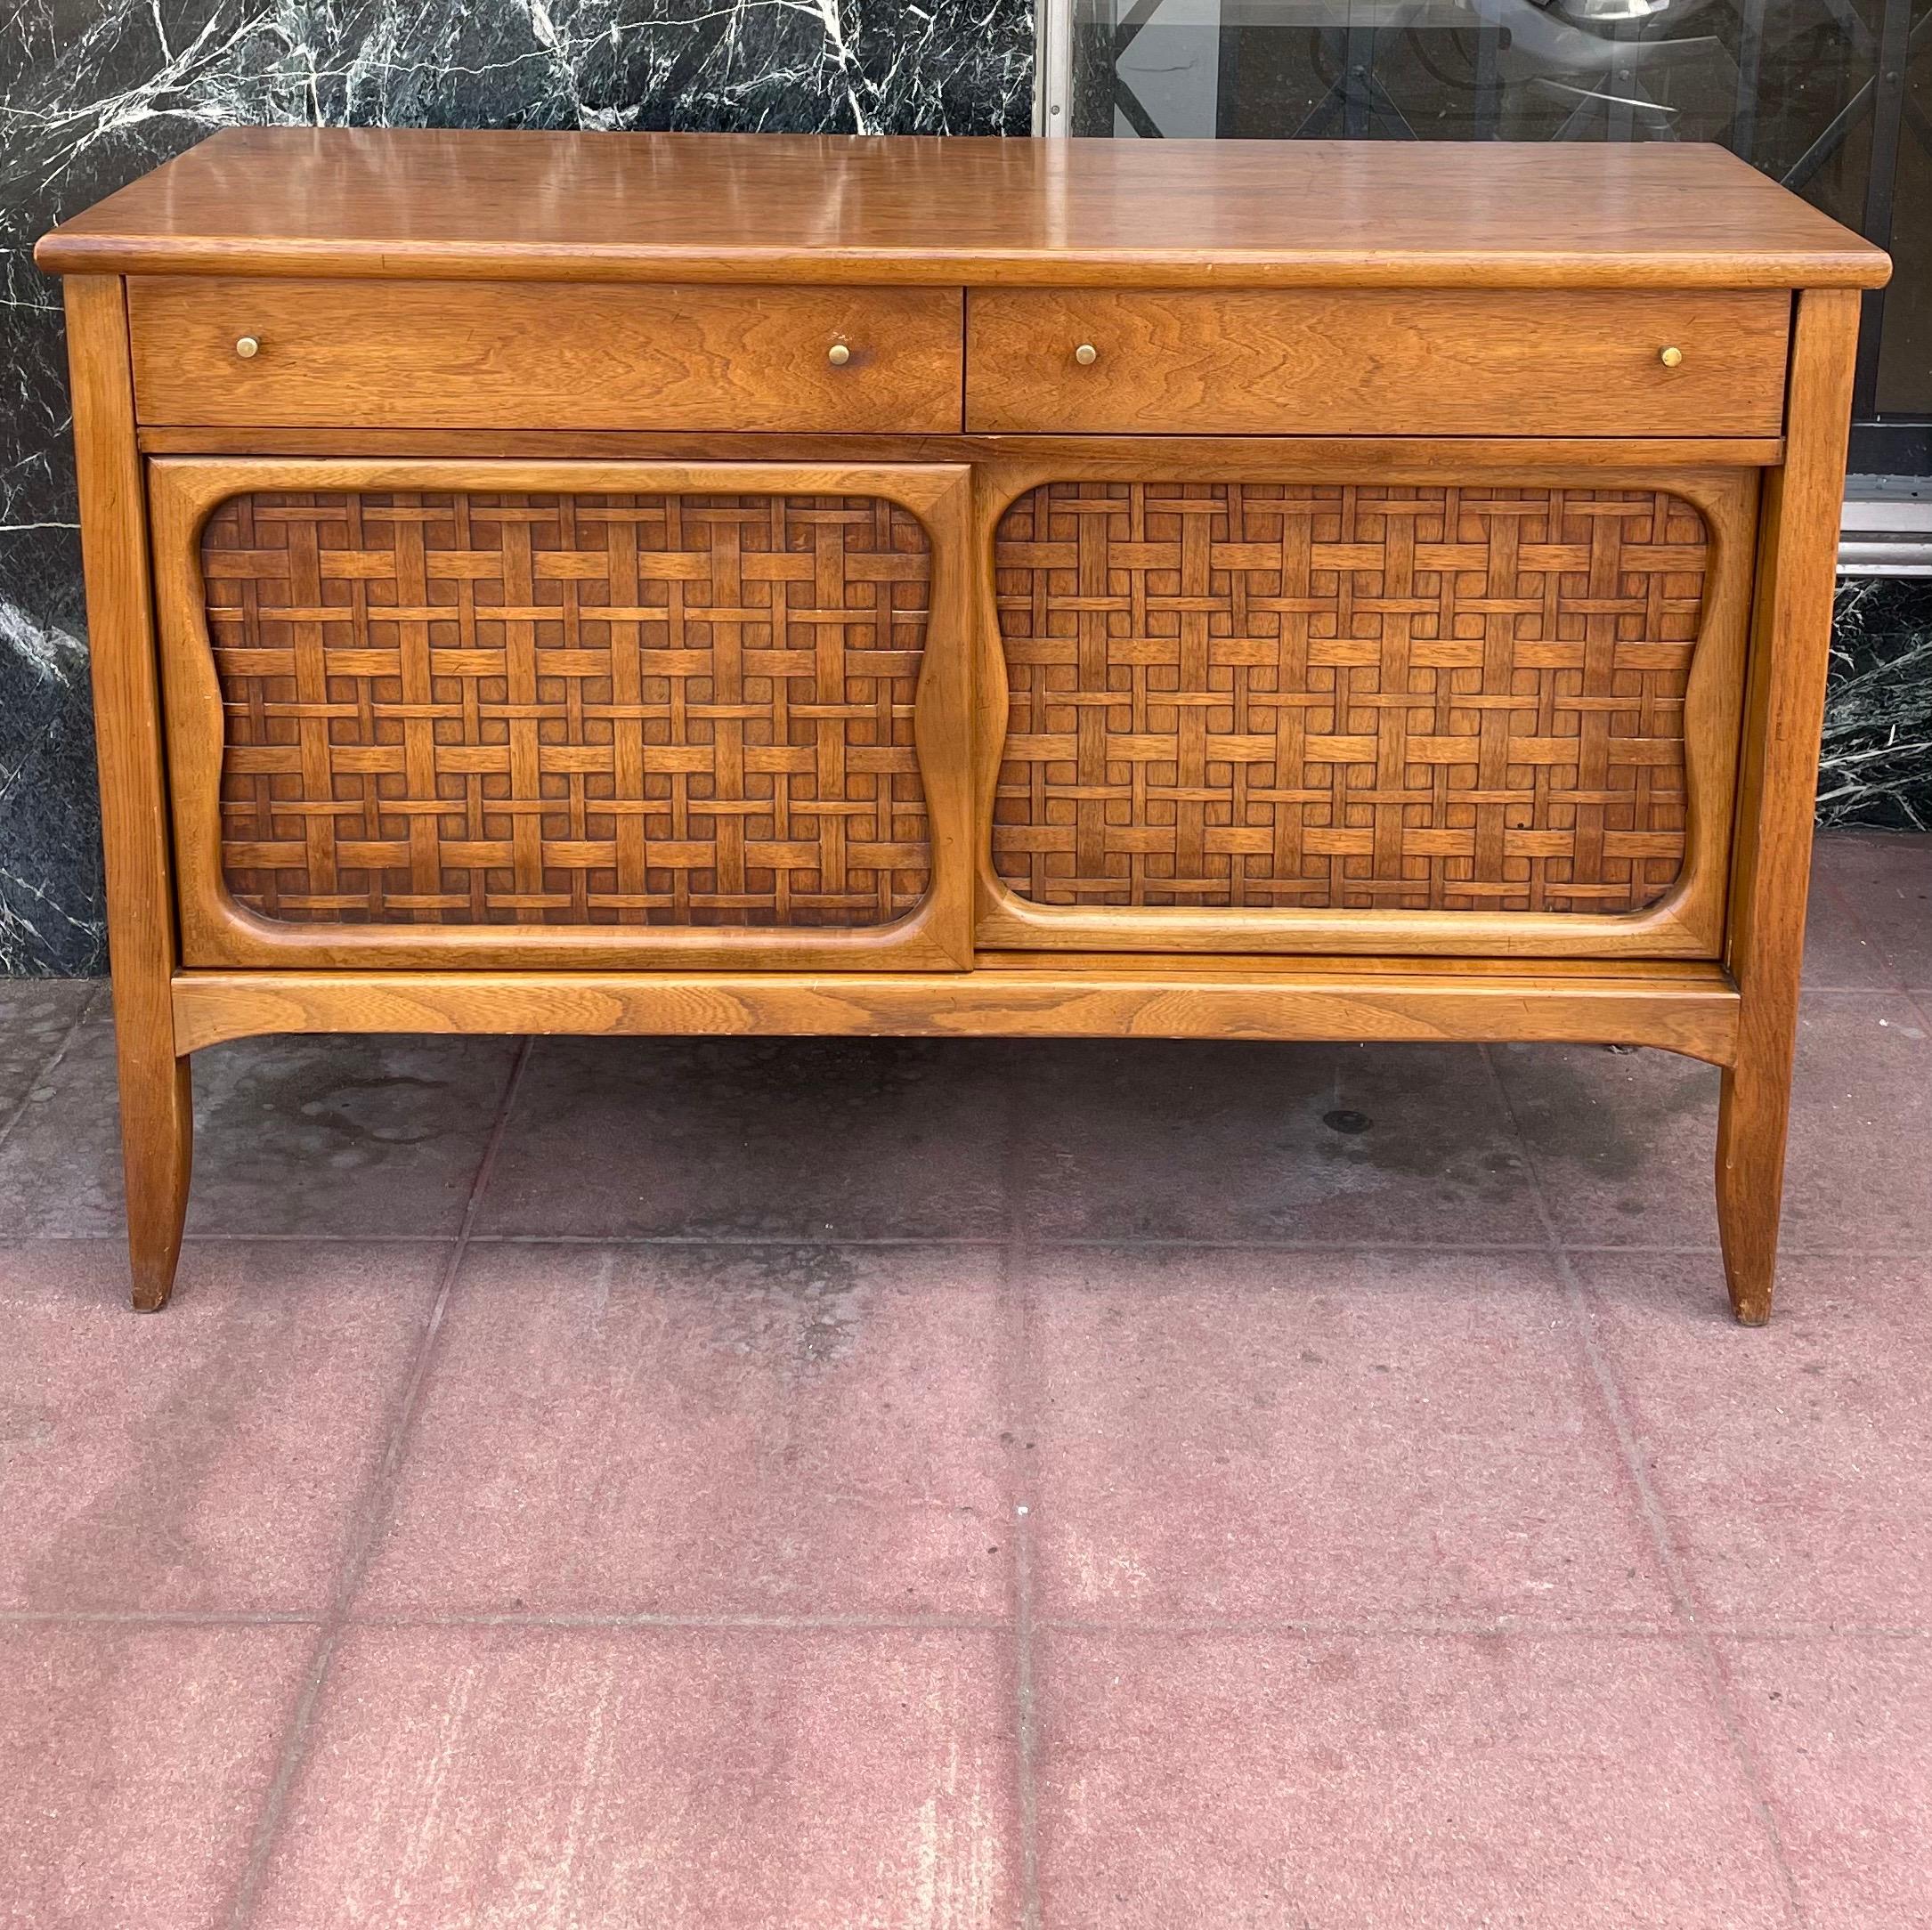 Beautiful classic atomic age design, American walnut credenza with woven wood front doors all in its original finish some light marks, great size good condition we have oiled and cleaned the piece but its sold as-is condition.